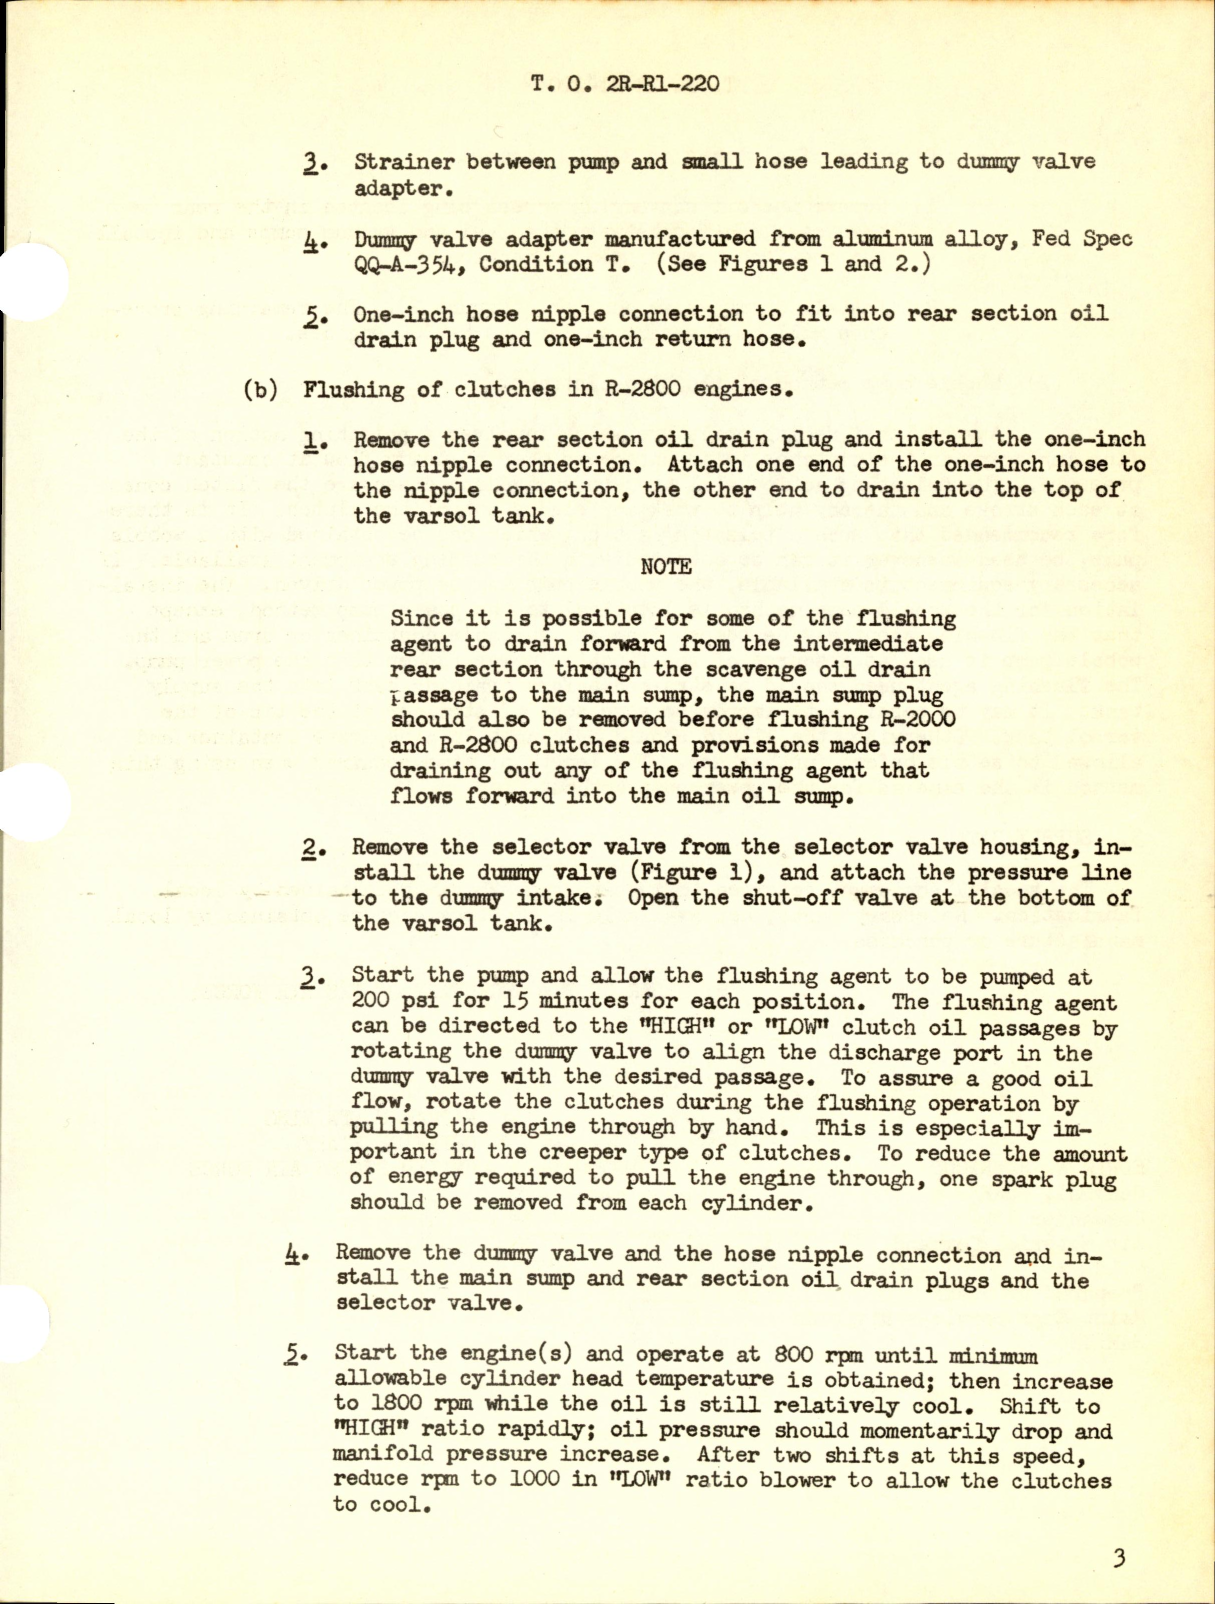 Sample page 3 from AirCorps Library document: Periodic Flushing of Clutches for R-2000 and R-2800 Engines